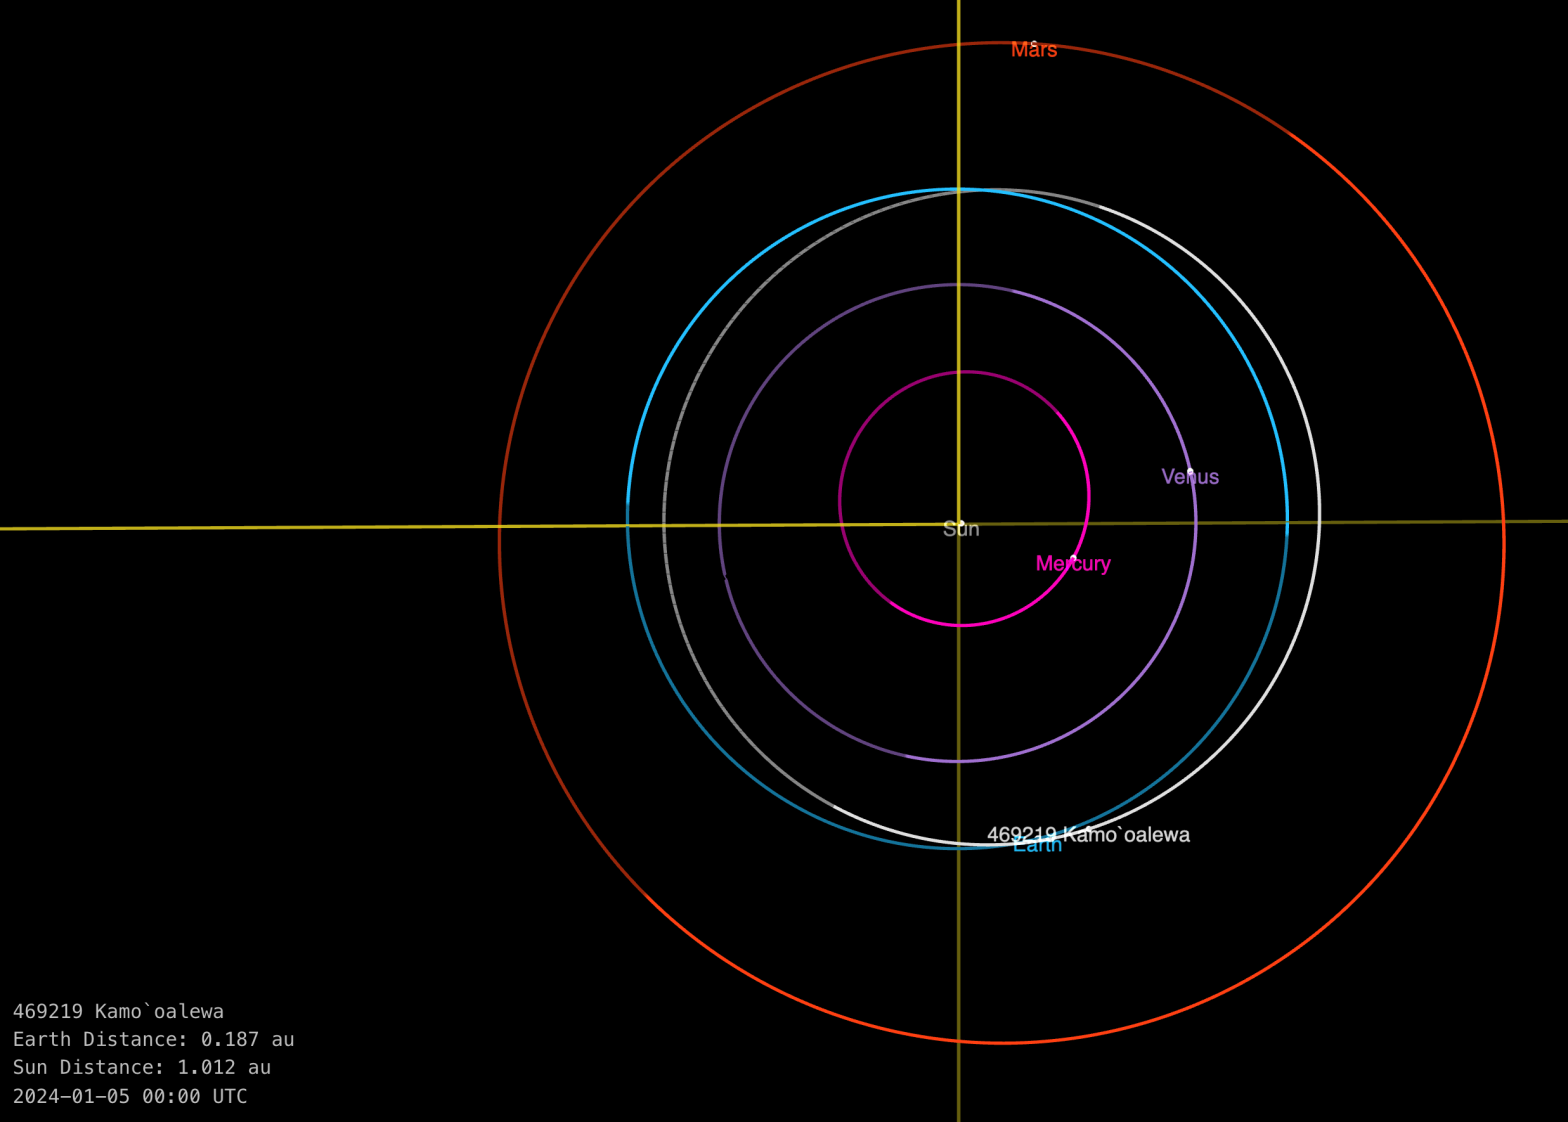 By using the NASA's JPL — Small-body Database Lookup, the orbit of 469219 Kamo'oalewa can be displayed alongside Earth's orbit. The orbits appear to be nearly identical but just shifted. In the bottom-left corner it provides the distance from Kamo'oalewa to Earth and to the Sun. Credit: NASA